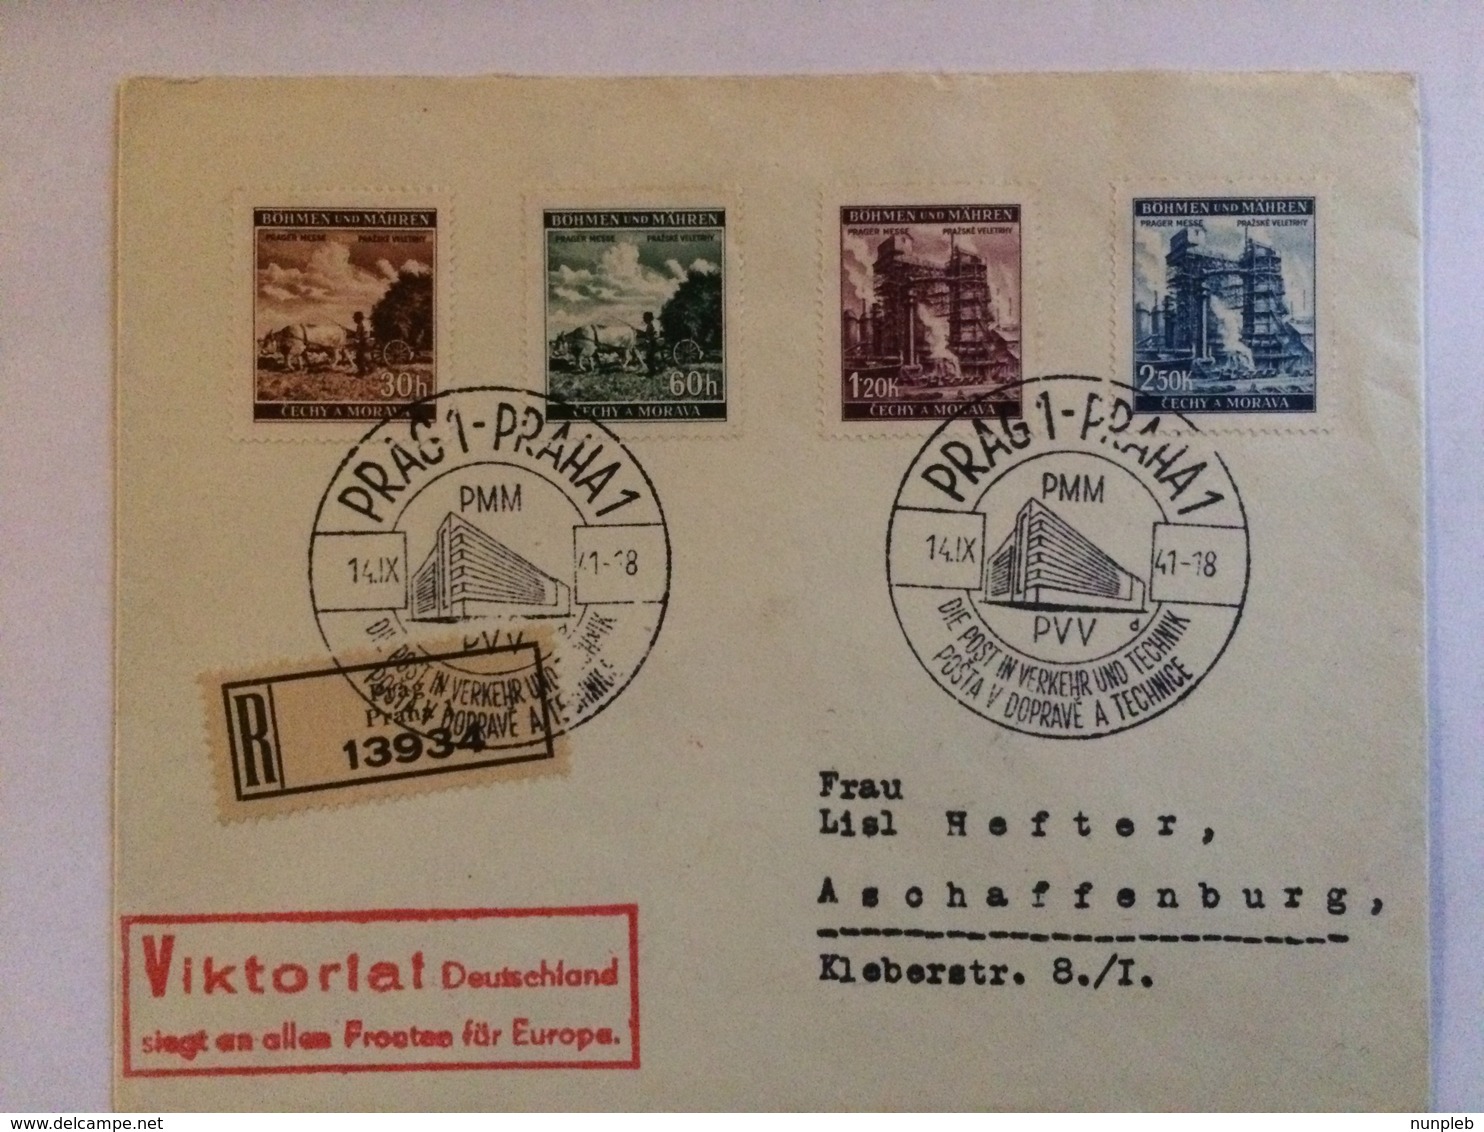 BOHMEN & MORAVIA 1941 Postcard Prague Registered To Aschaffenburg With Technical Exhibition Handstamps + Victory Cachet - Covers & Documents